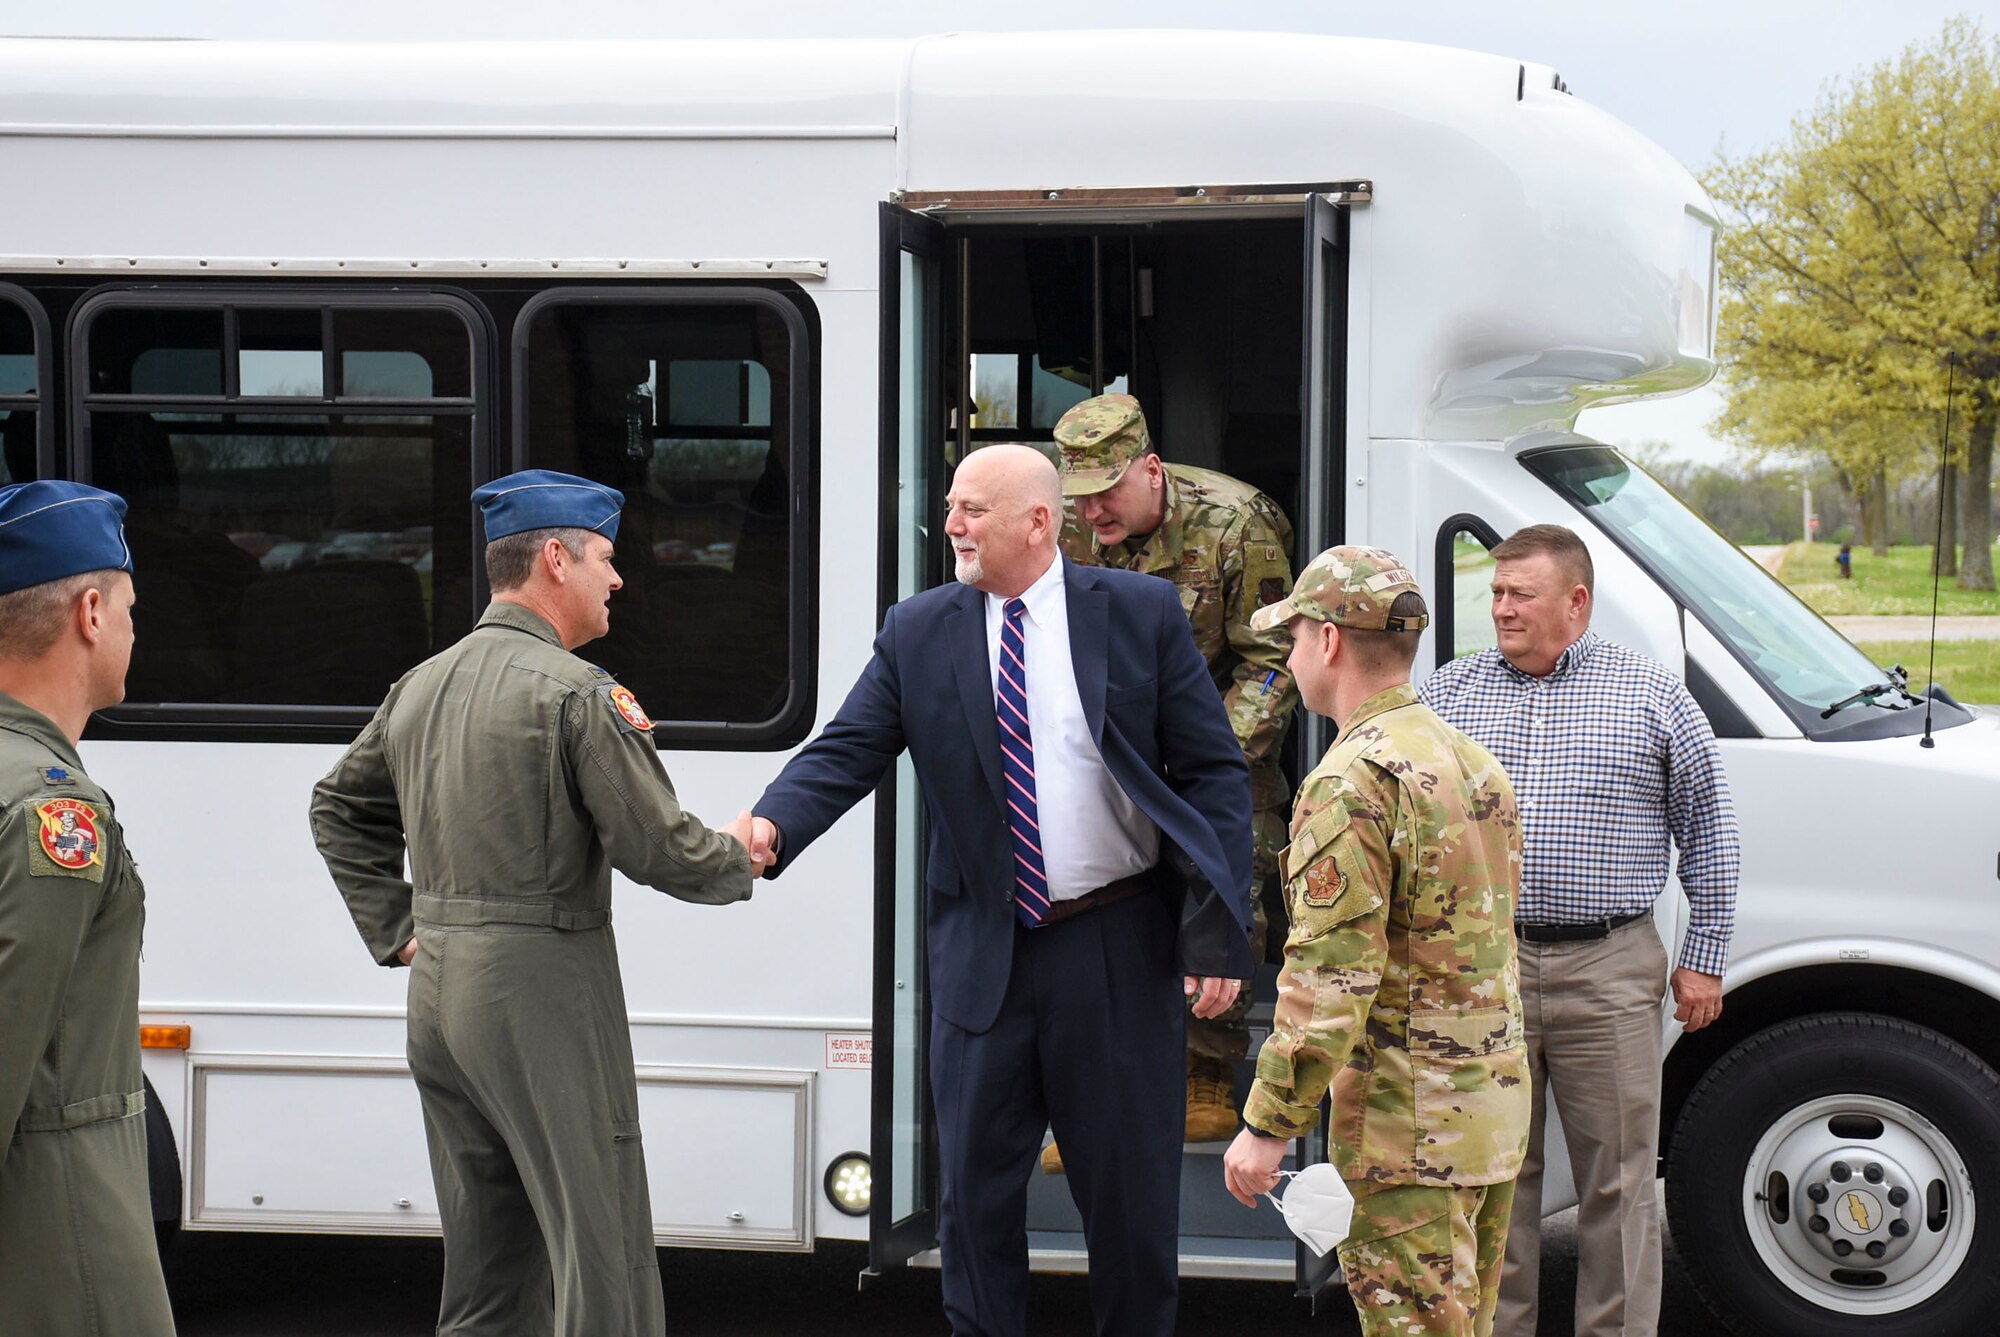 A man in a black suit steps off a bus and shakes hands with a man in a green flight suit.